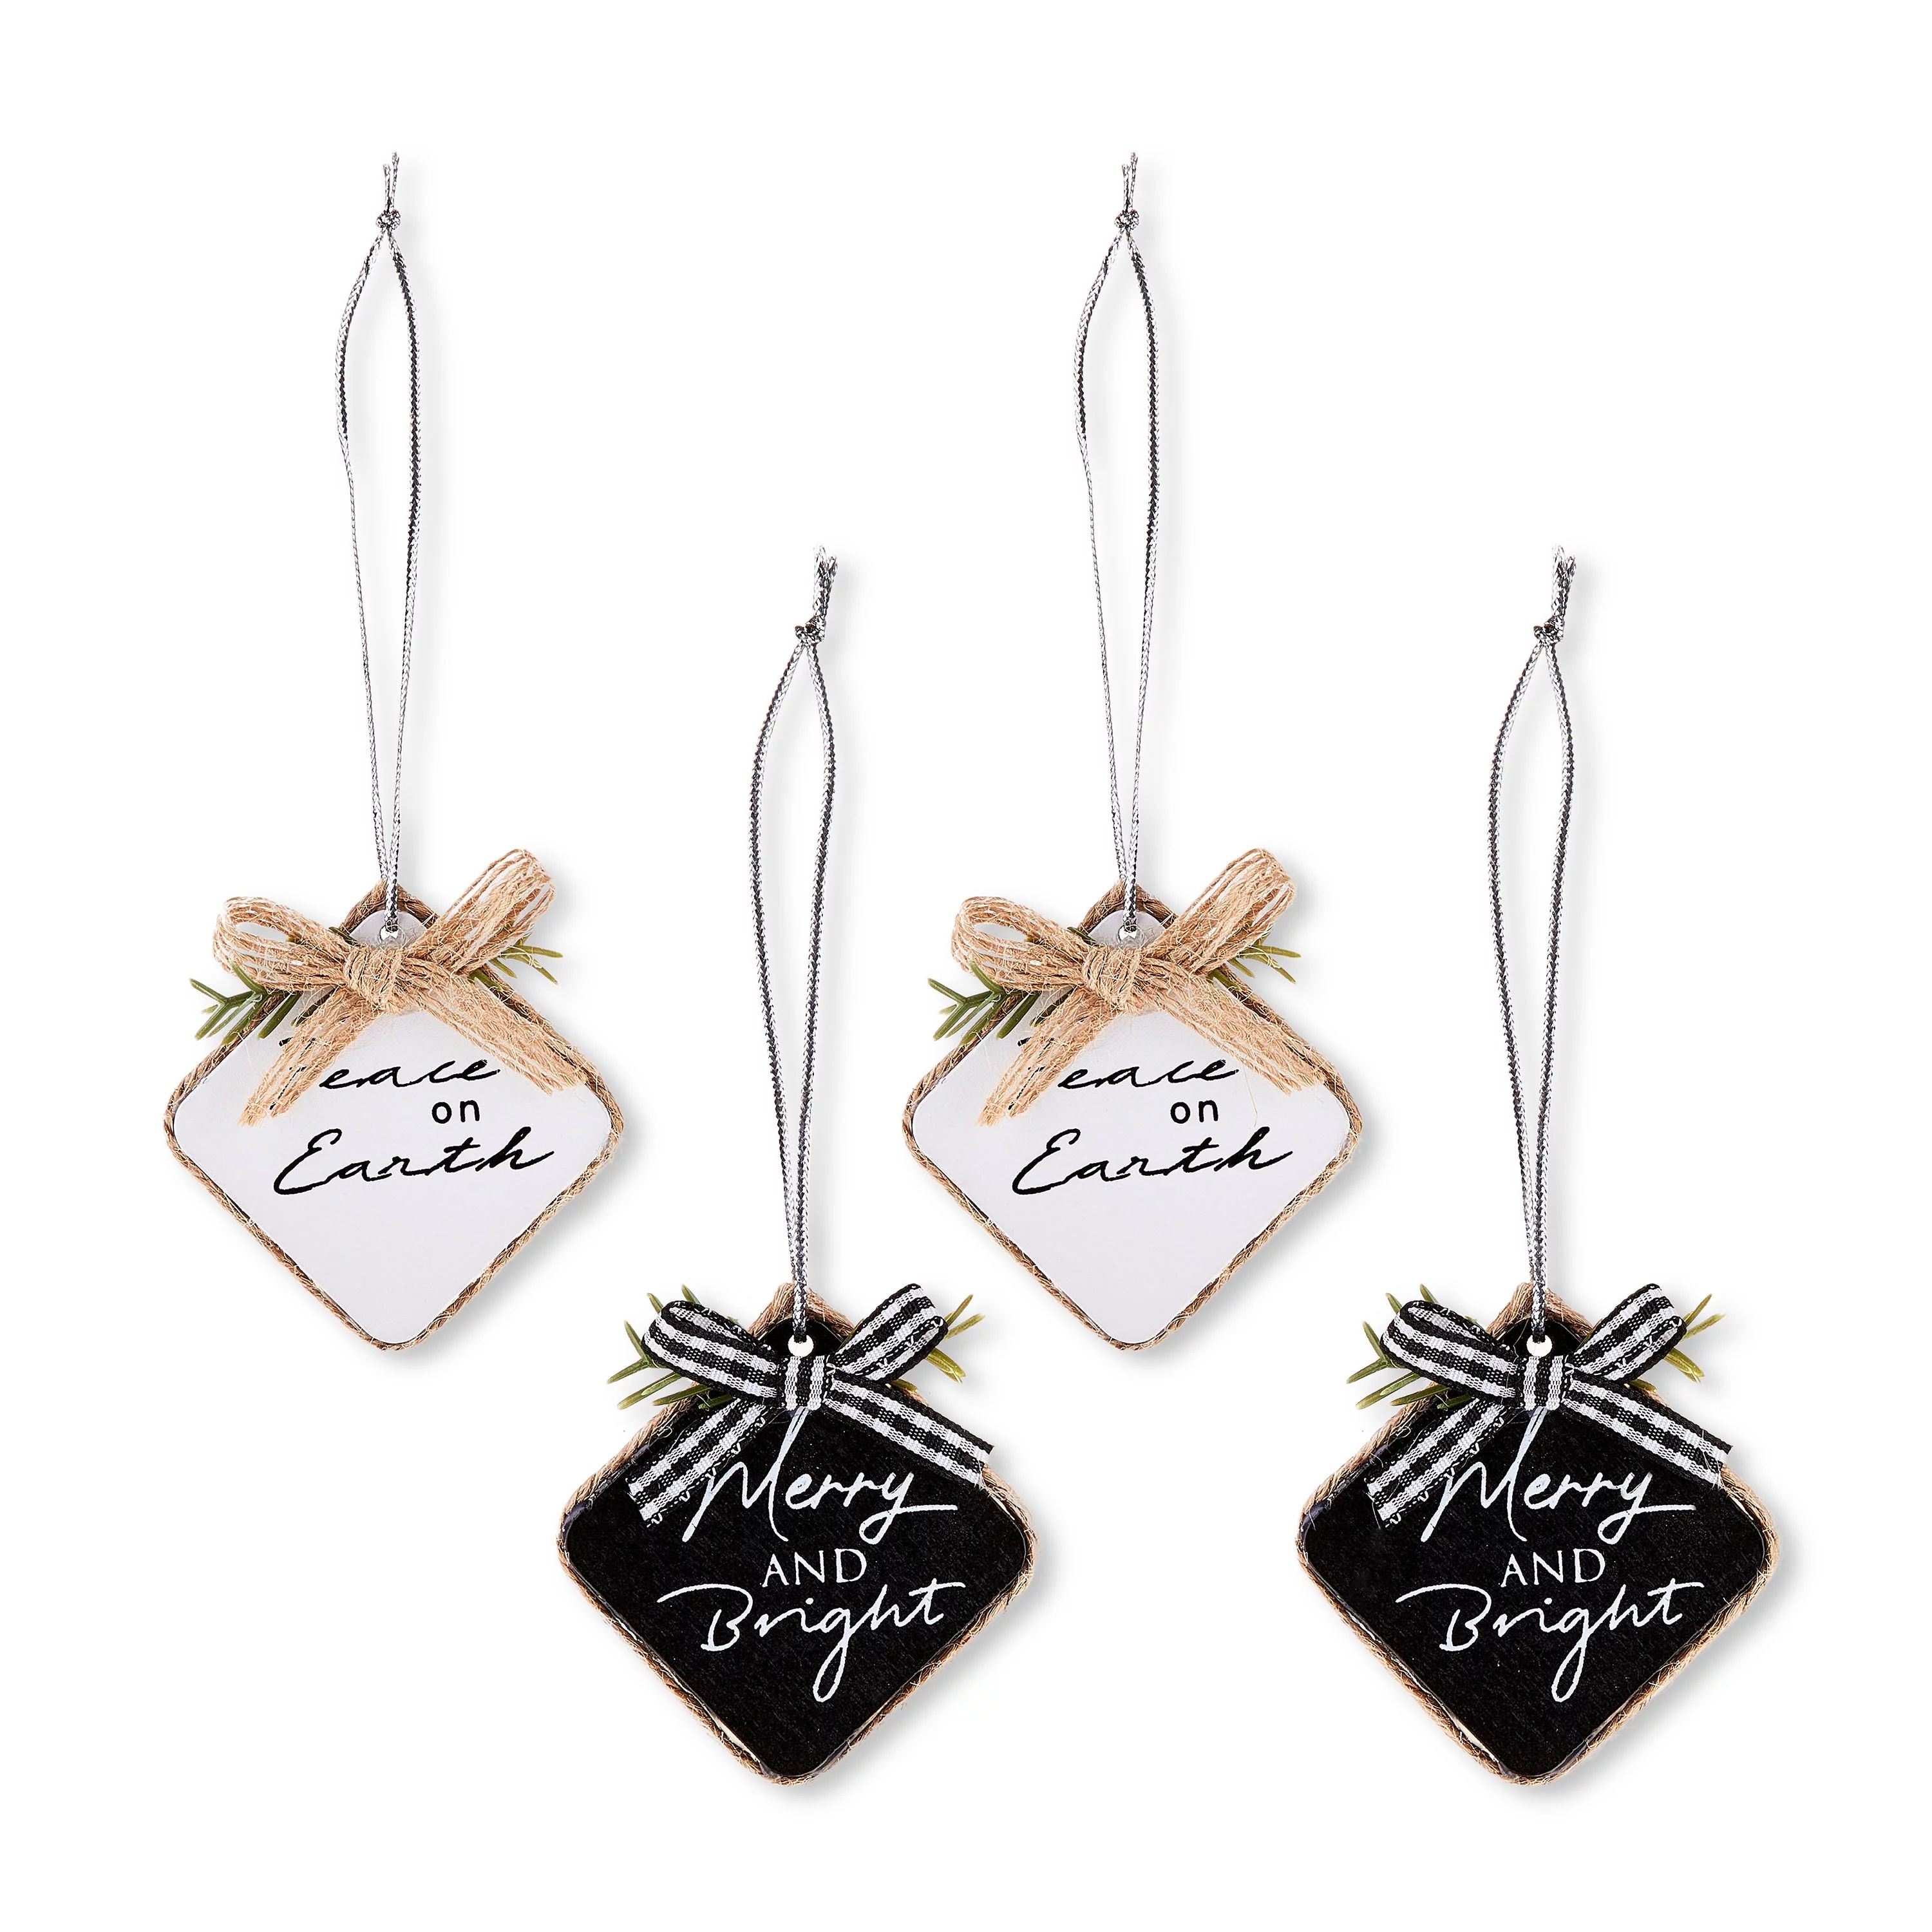 Mini Black & White Wooden Sign Christmas Ornaments, 0.1466 lb, 4 Count, by Holiday Time - Walmart... | Walmart (US)